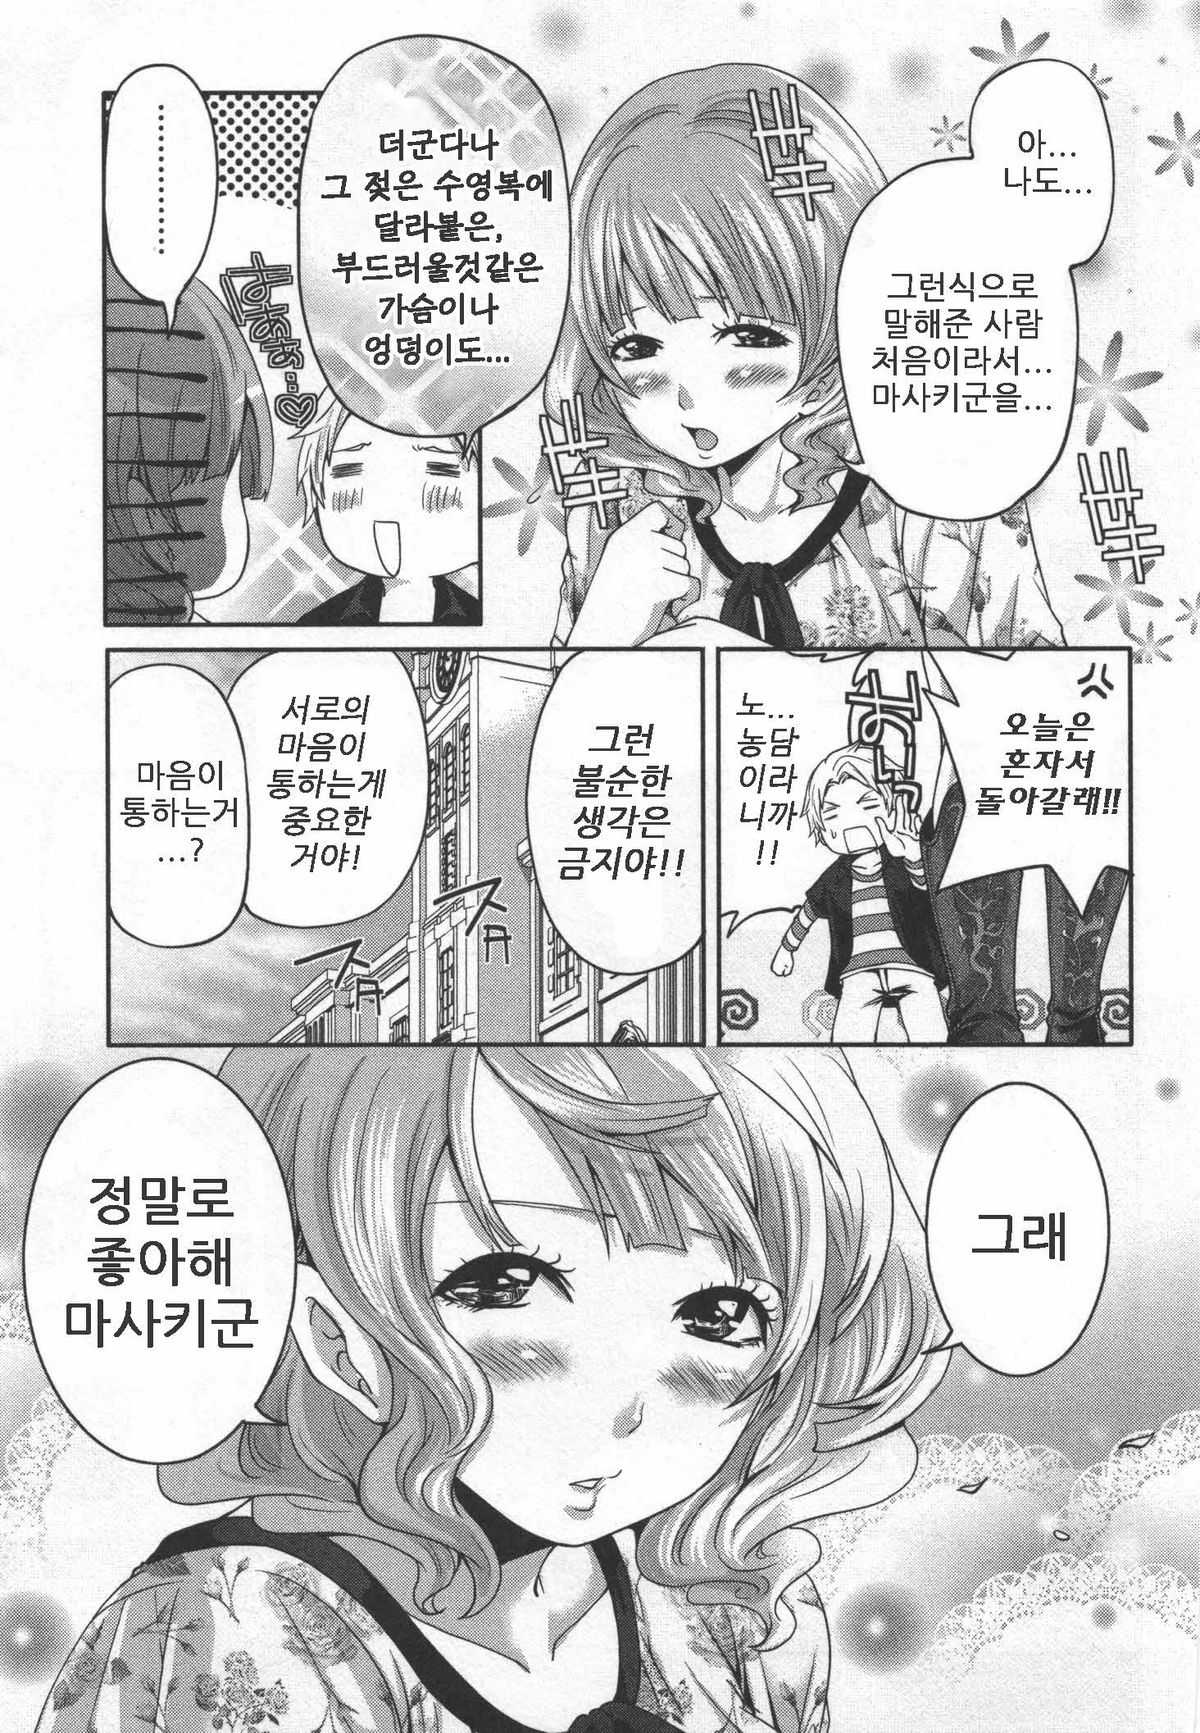 [Miyahara Ayumu] Too passionate a letter, written with longing and desire (korean) (成年コミック) [宮原歩] 望月さんの恋文 [韓国翻訳]